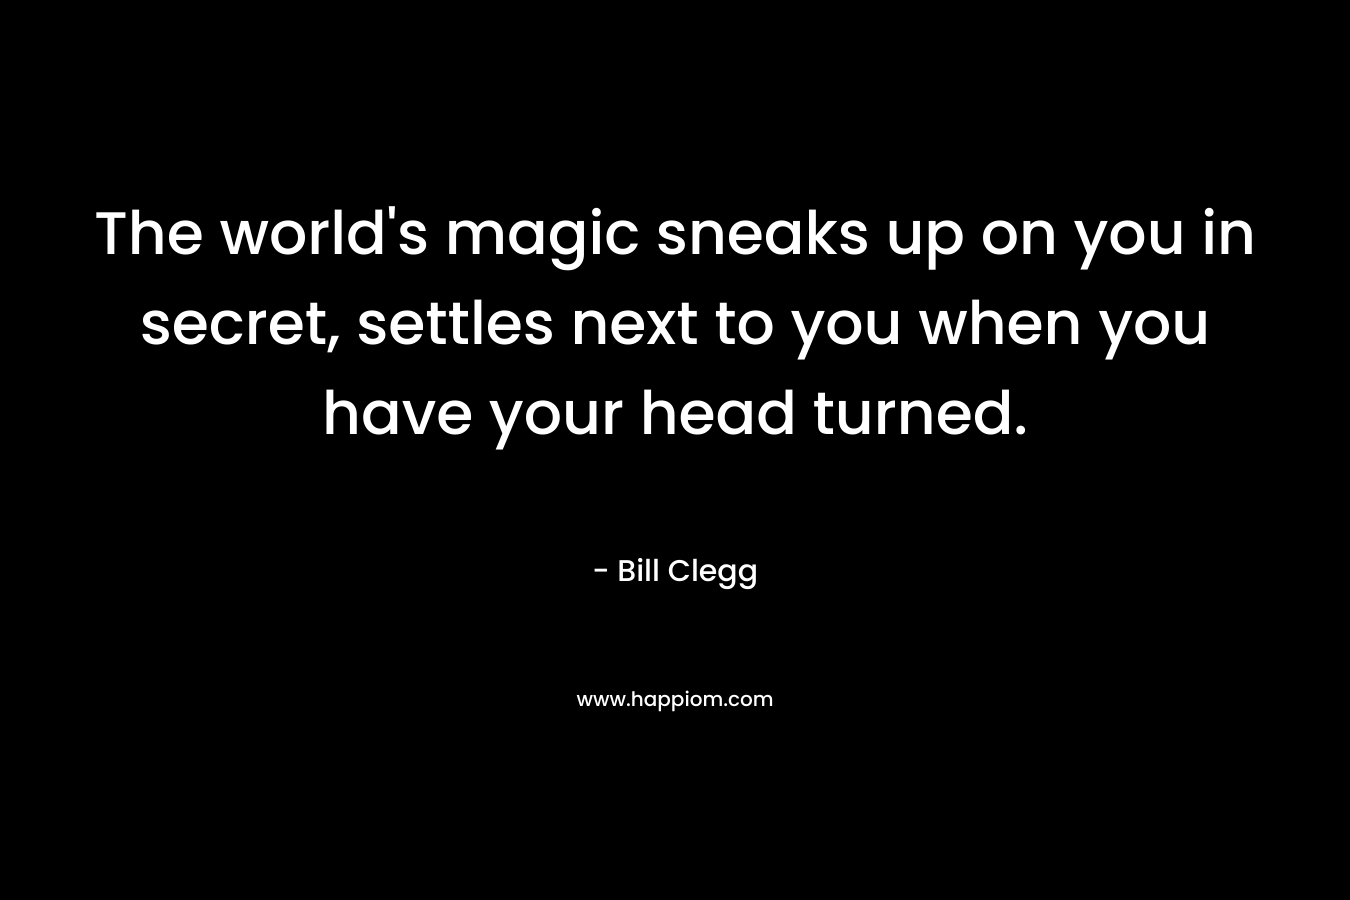 The world's magic sneaks up on you in secret, settles next to you when you have your head turned.